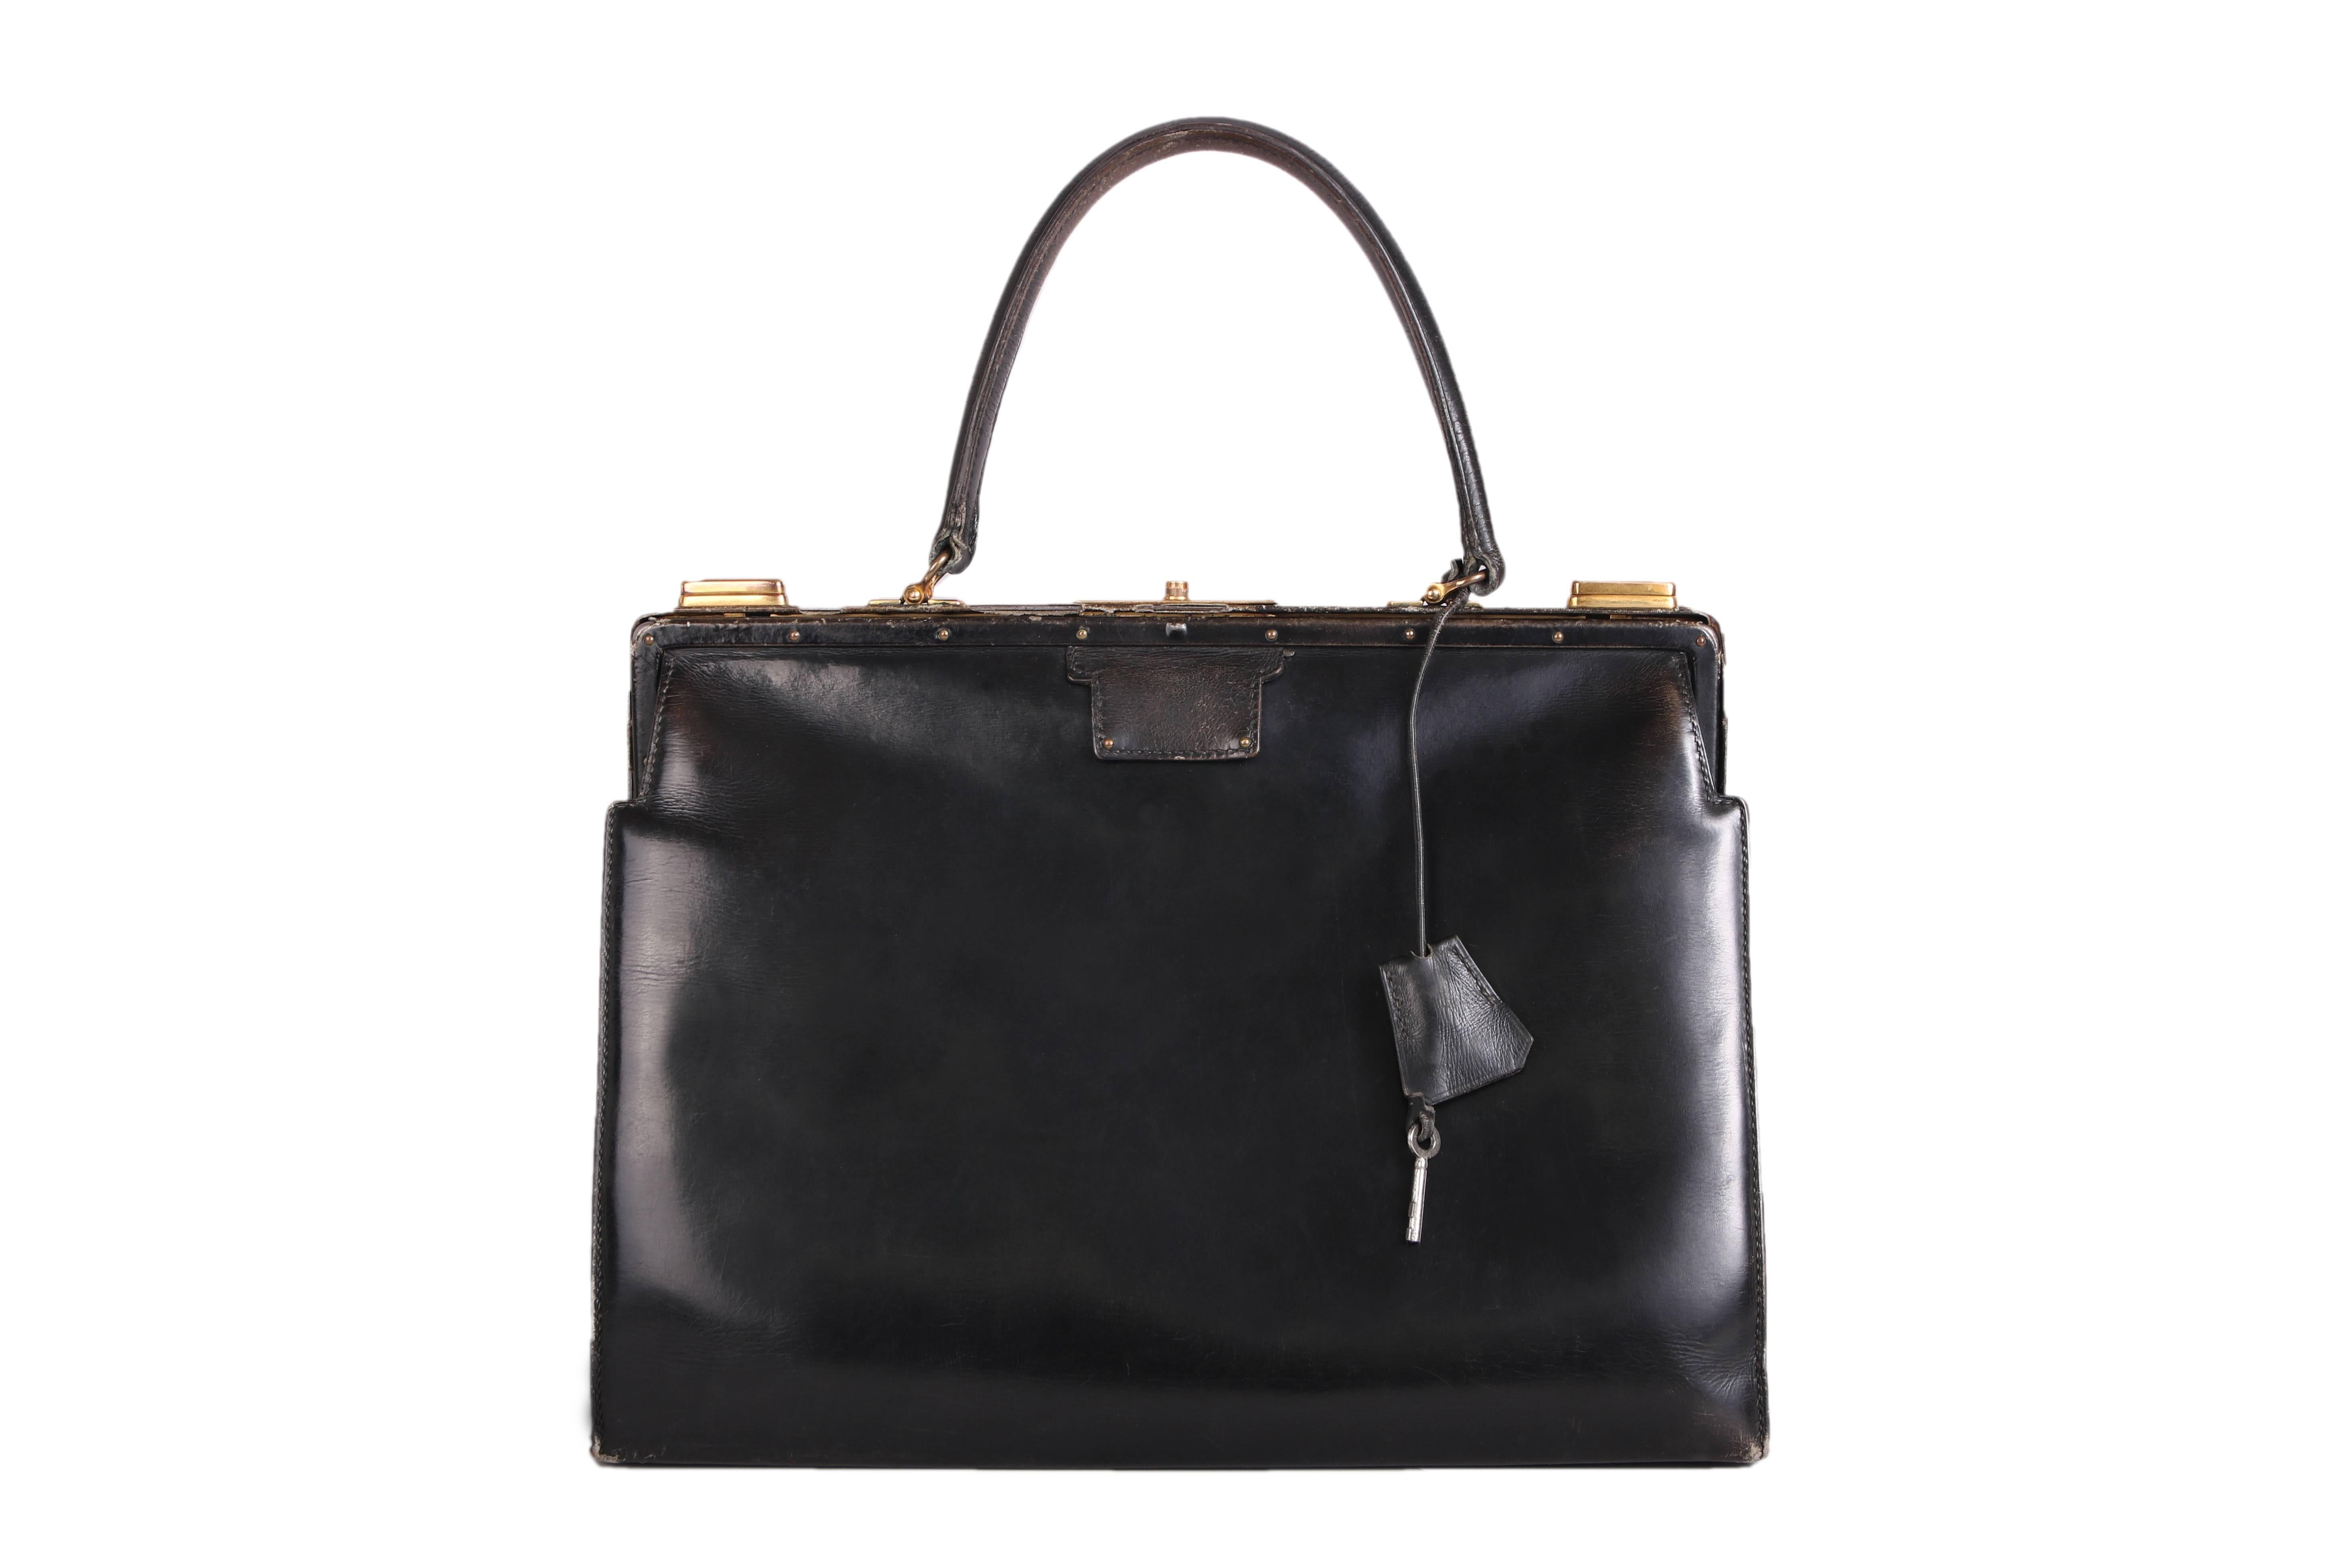 Vintage Hermes black leather handbag with lock & key. Features gold hardware and black leather interior. In good vintage condition with minor scratches and scuffs at the interior and exterior. There is some peeling of the leather covering the metal